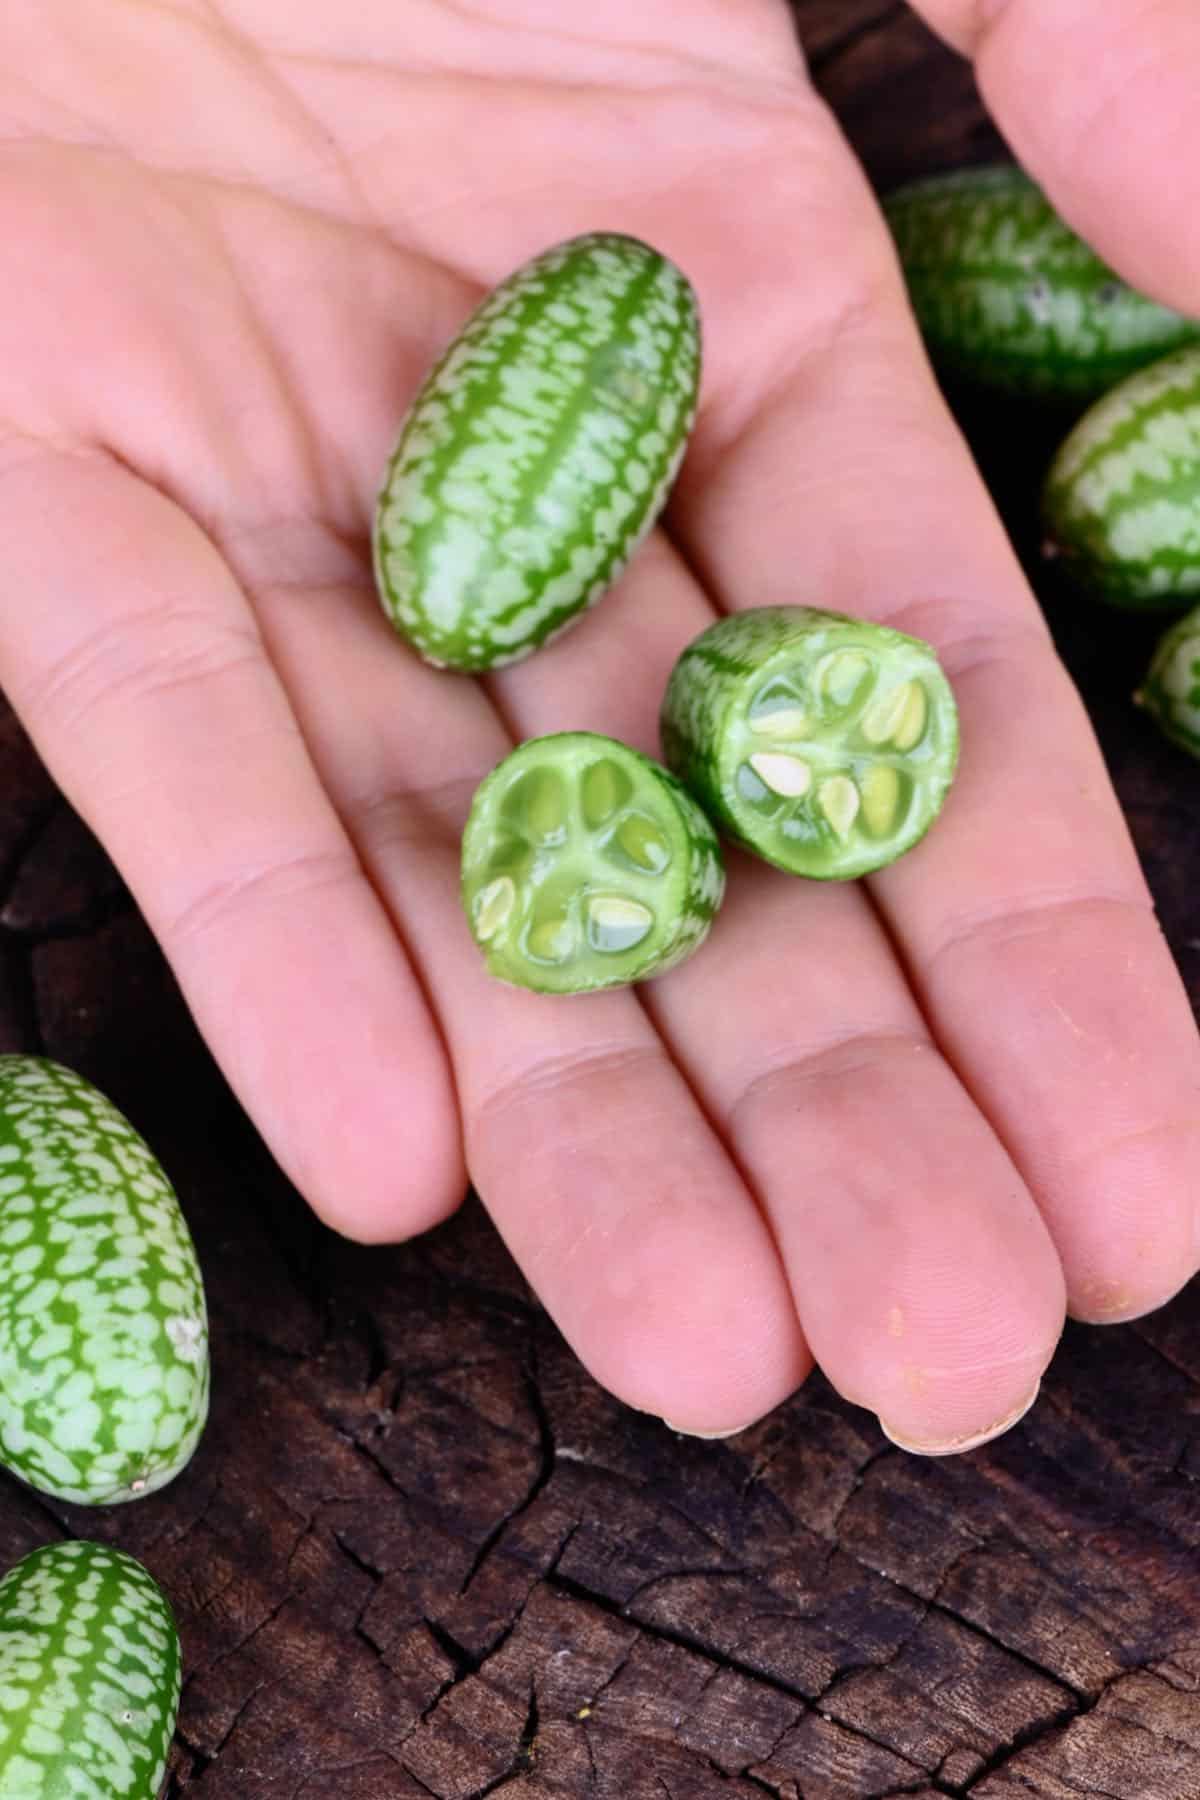 Cucamelon berries held in a hand